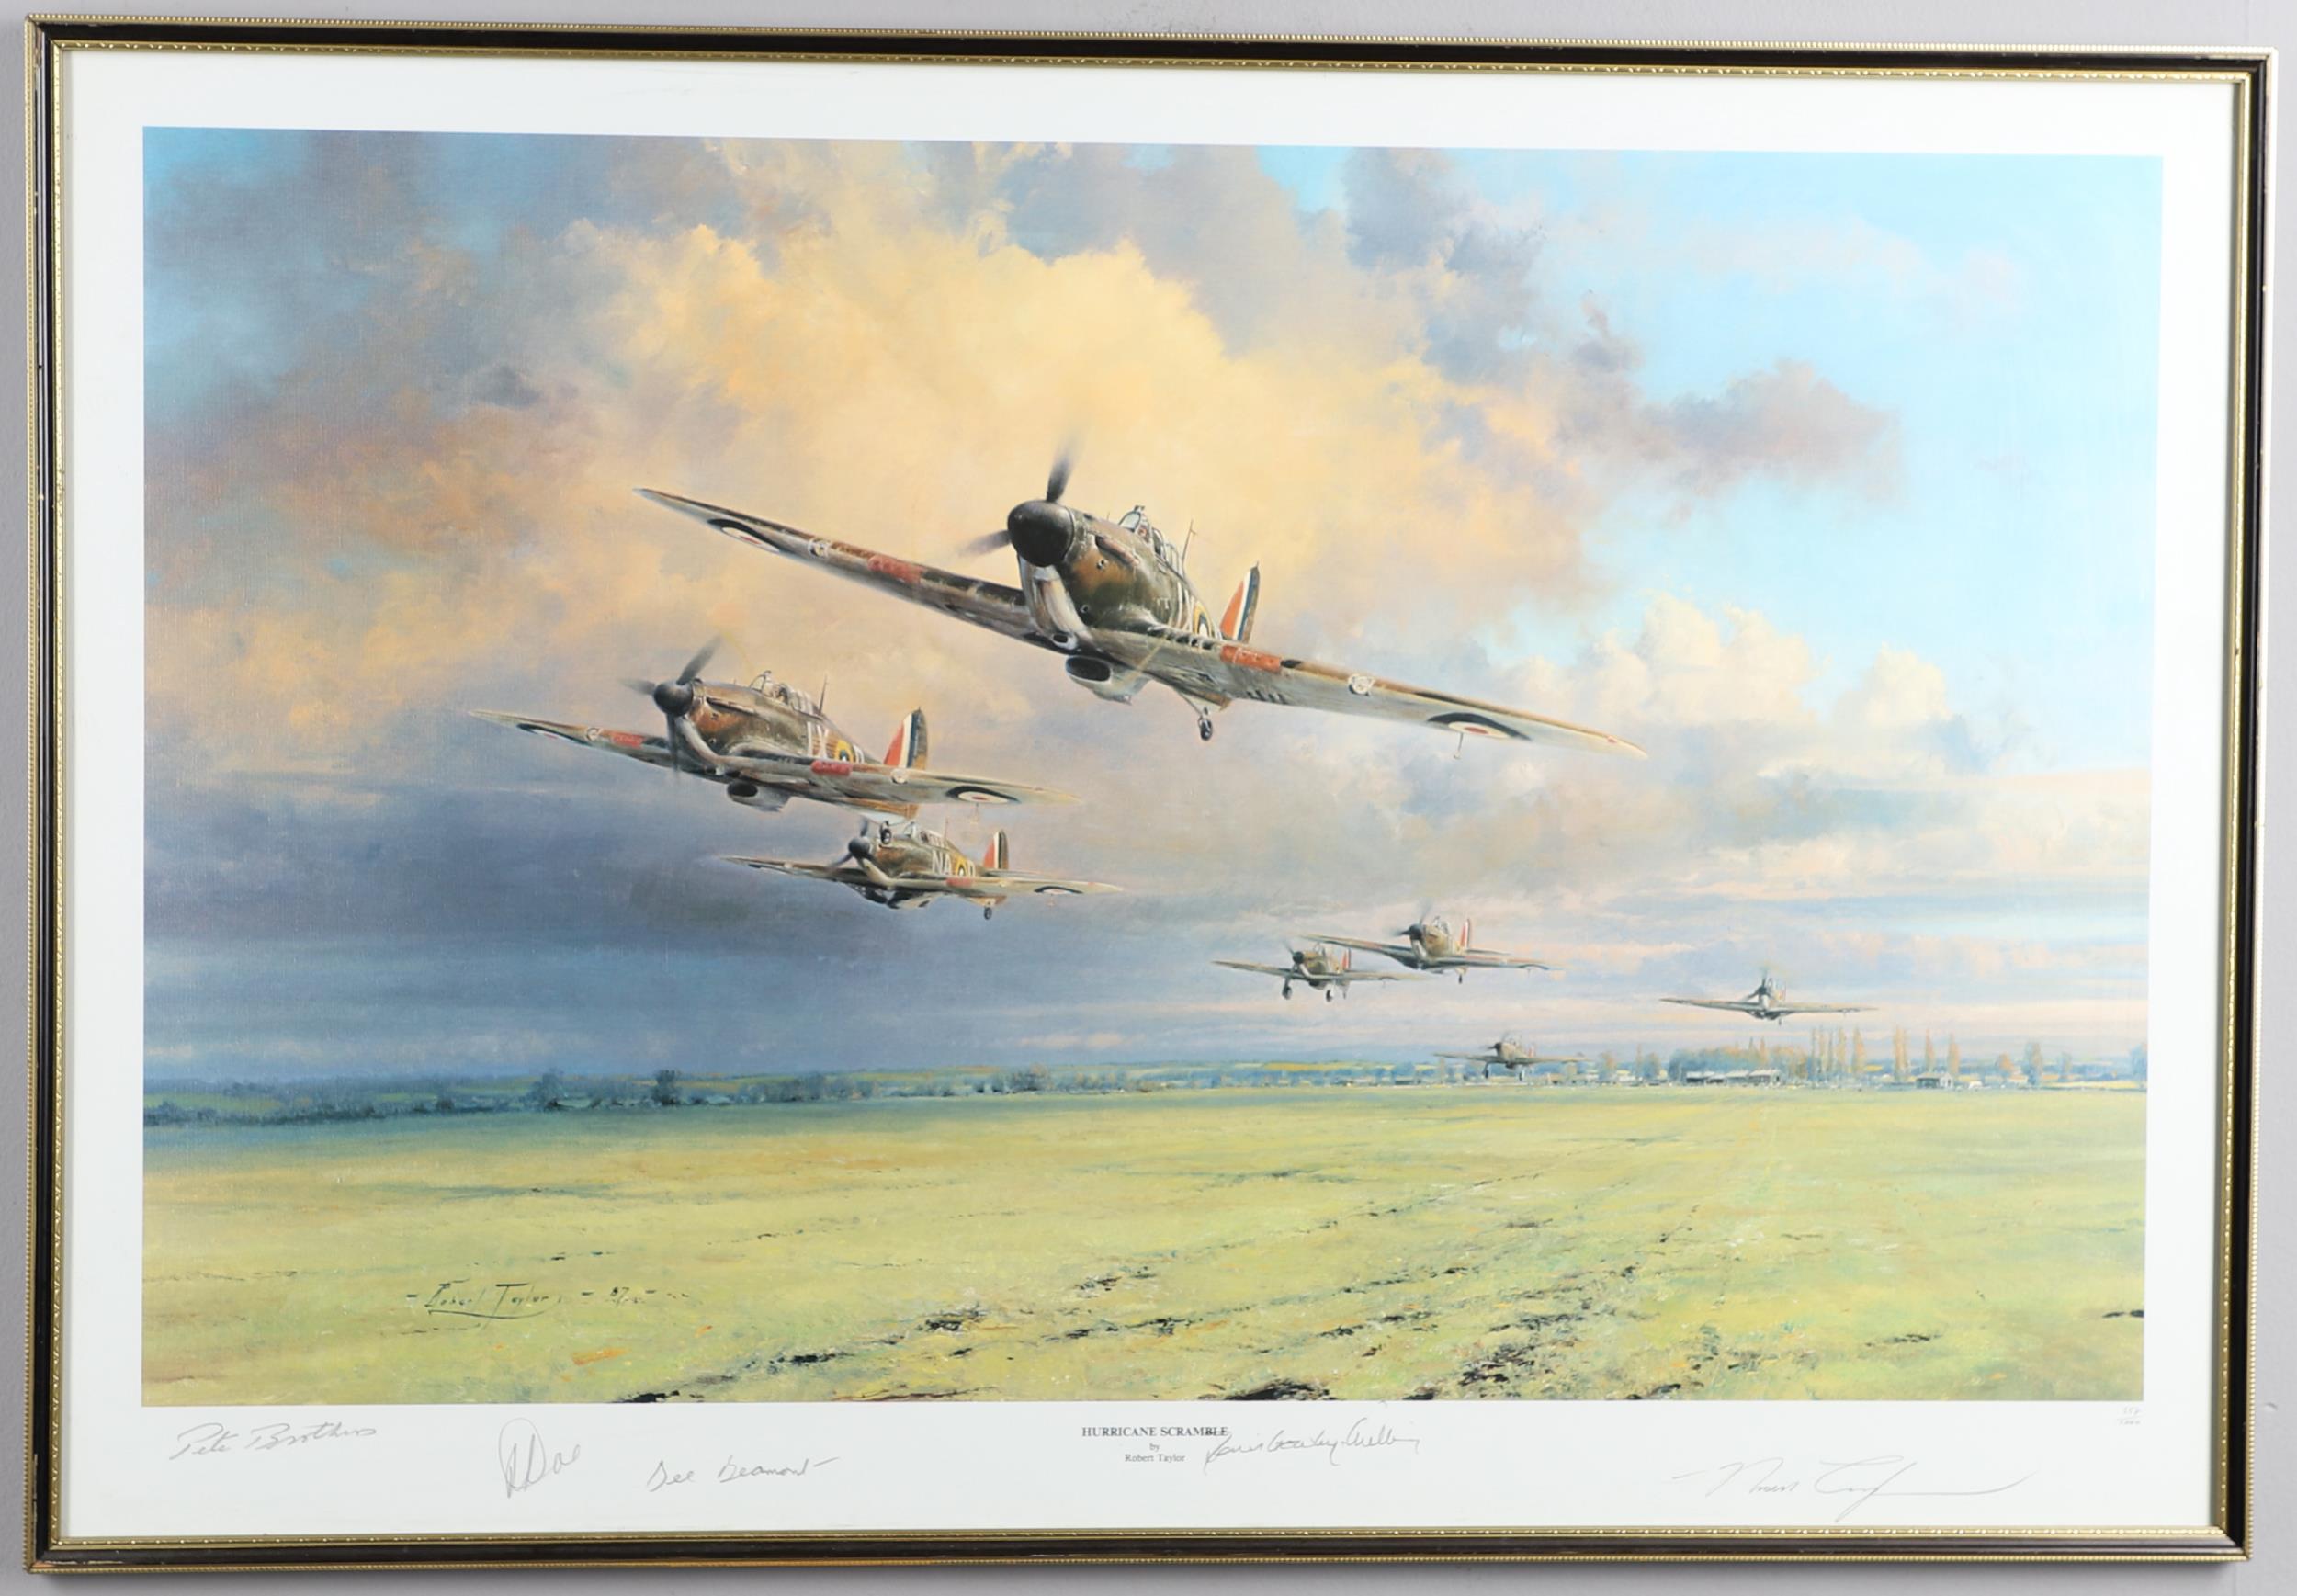 HURRICANE SCRAMBLE BY ROBERT TAYLOR, A COLOUR PRINT WITH PILOT'S SIGNATURES IN THE MARGIN.